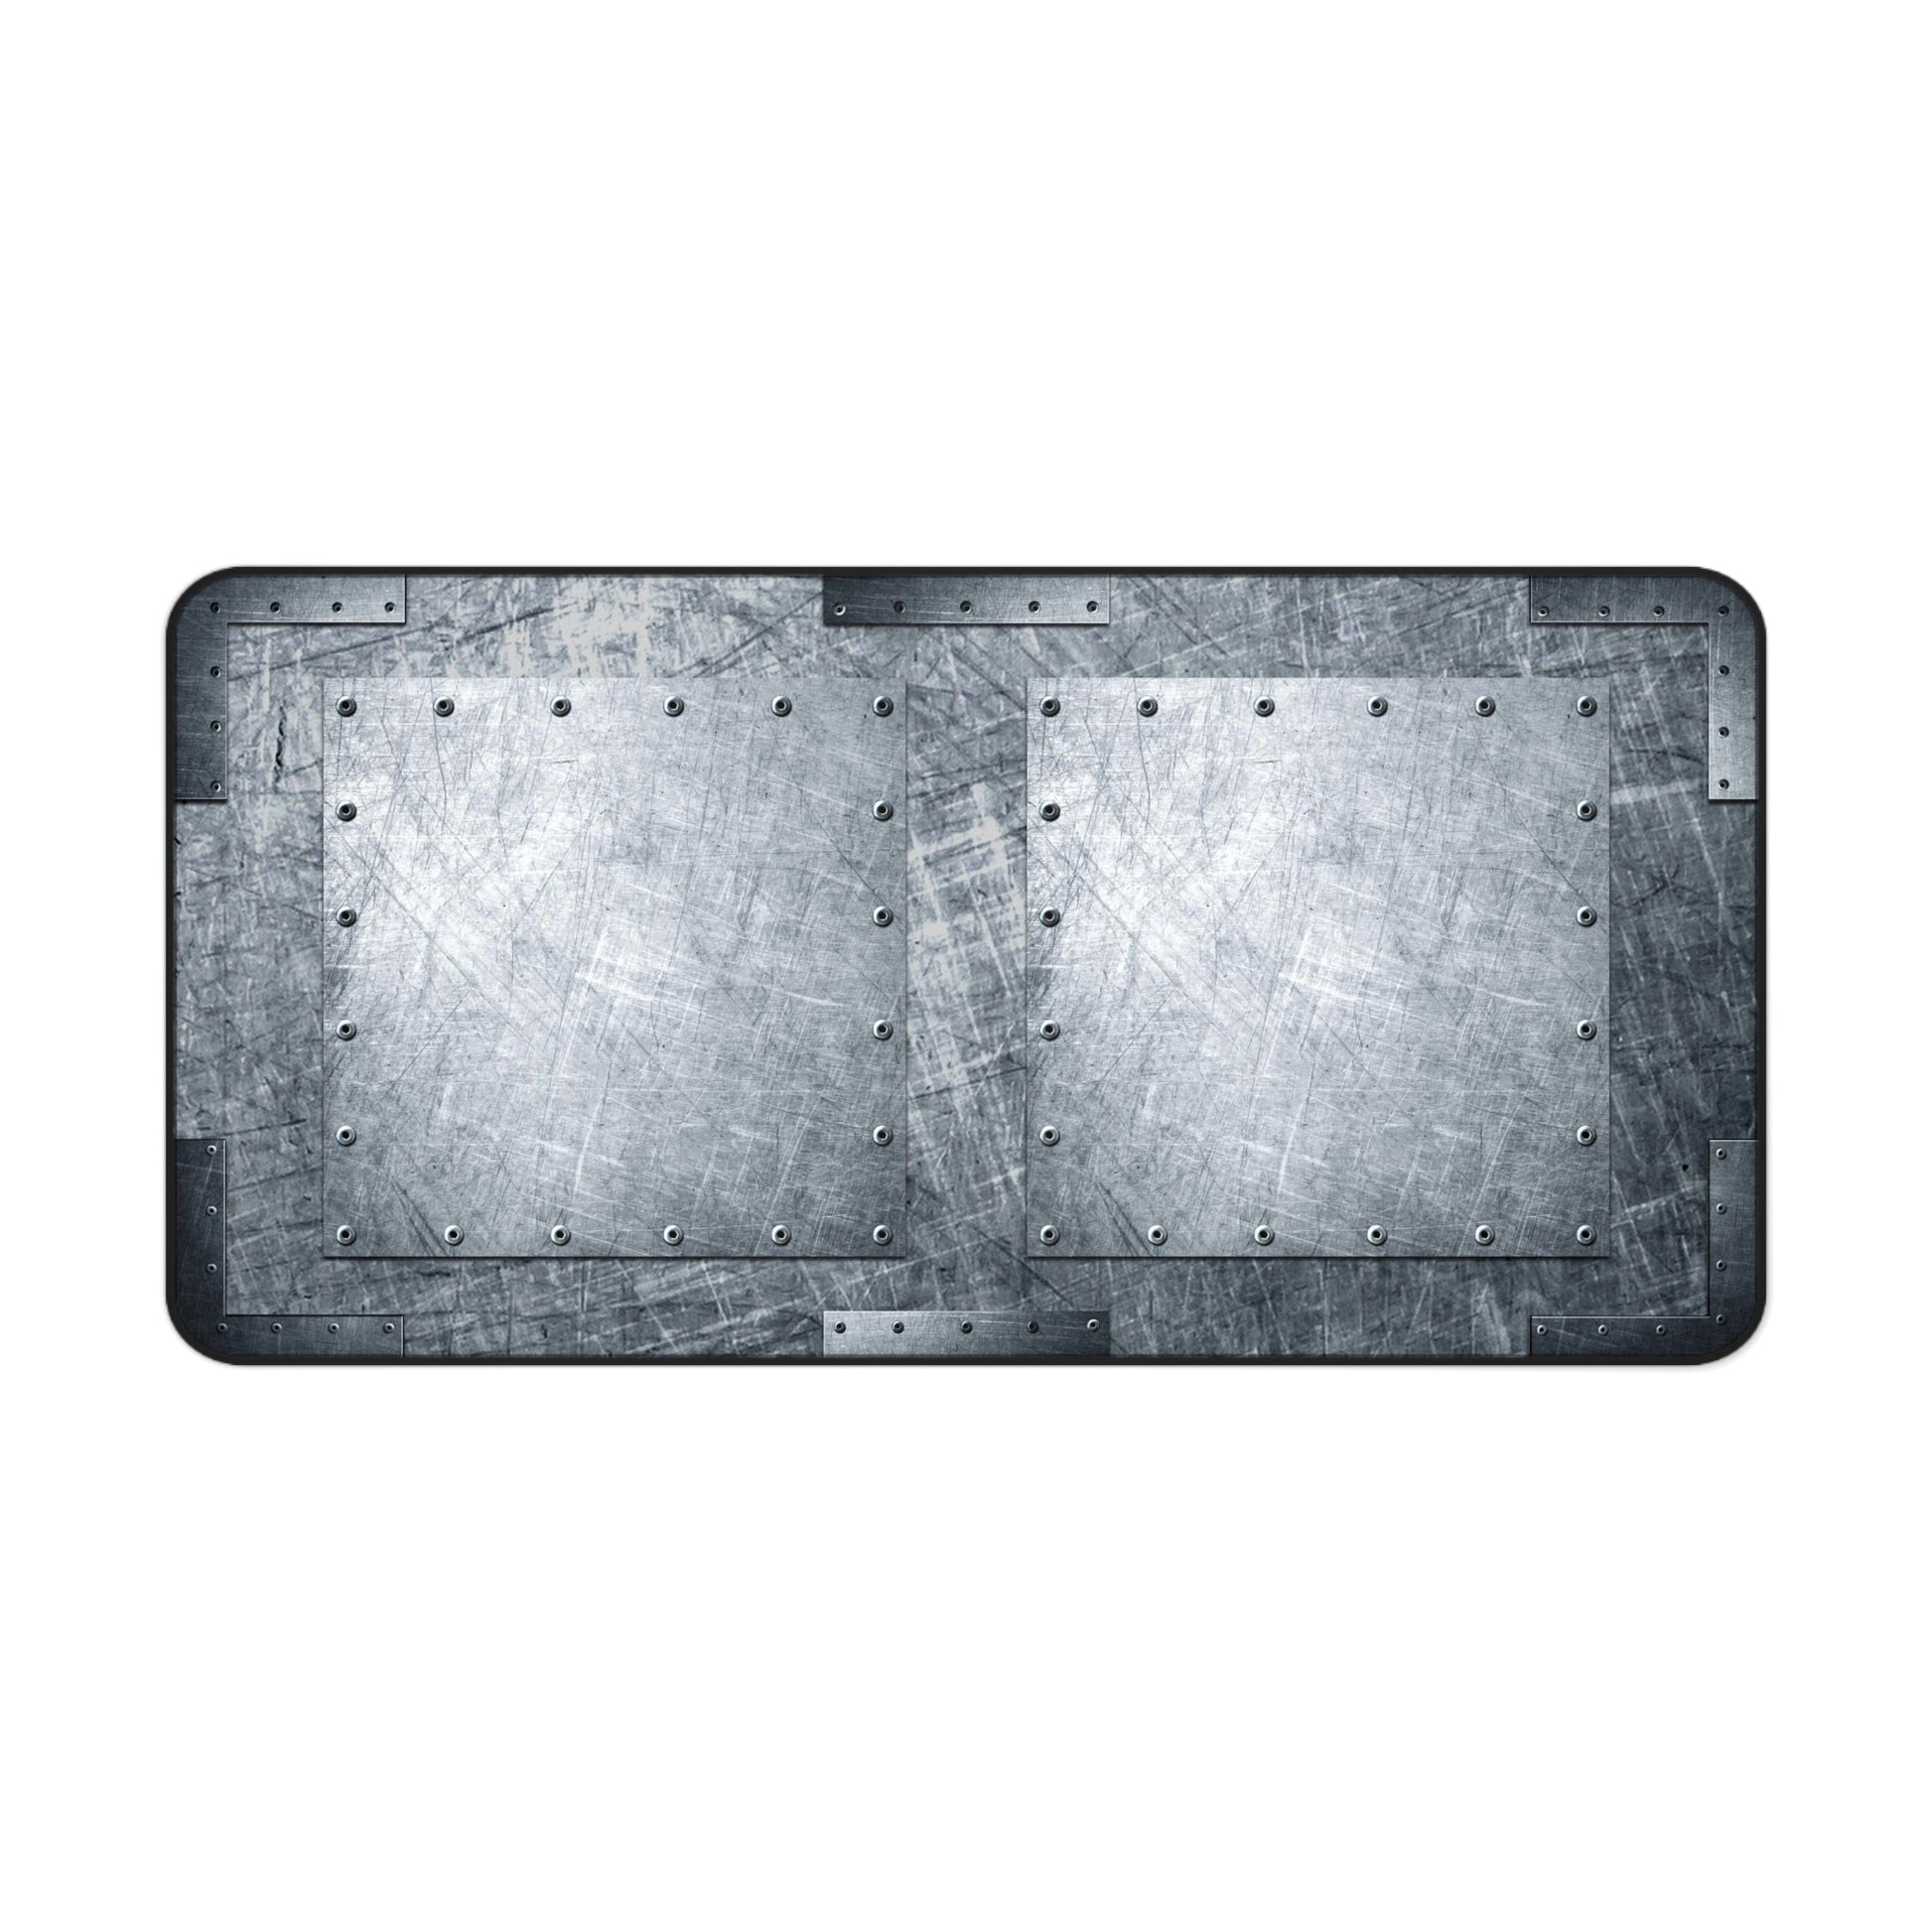 Industrial Themed Desk Accessories - Riveted Steel Sheets Print on Neoprene Desk Mat 15.5 by 31